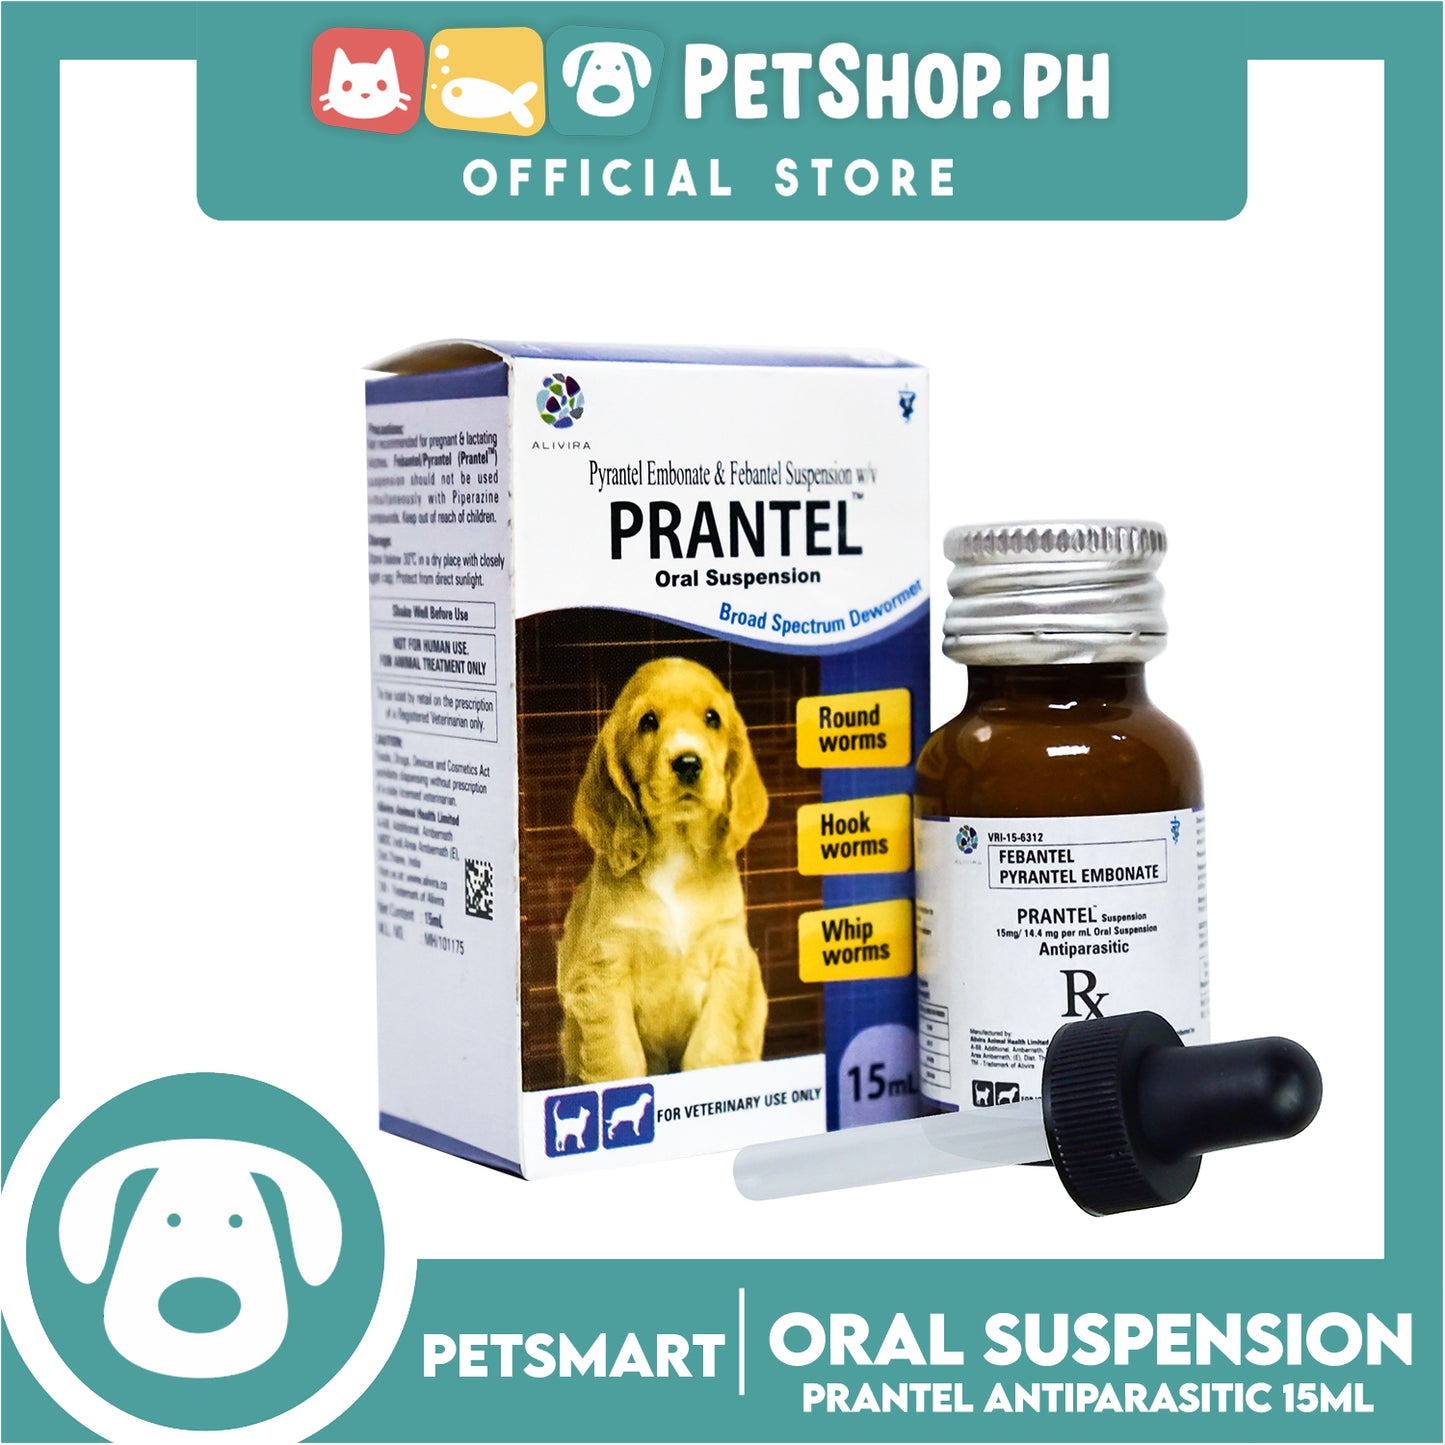 Prantel Oral Suspension Broad Spectrum Dewormer 15ml Antiparasitic, For Veterinary Use Only